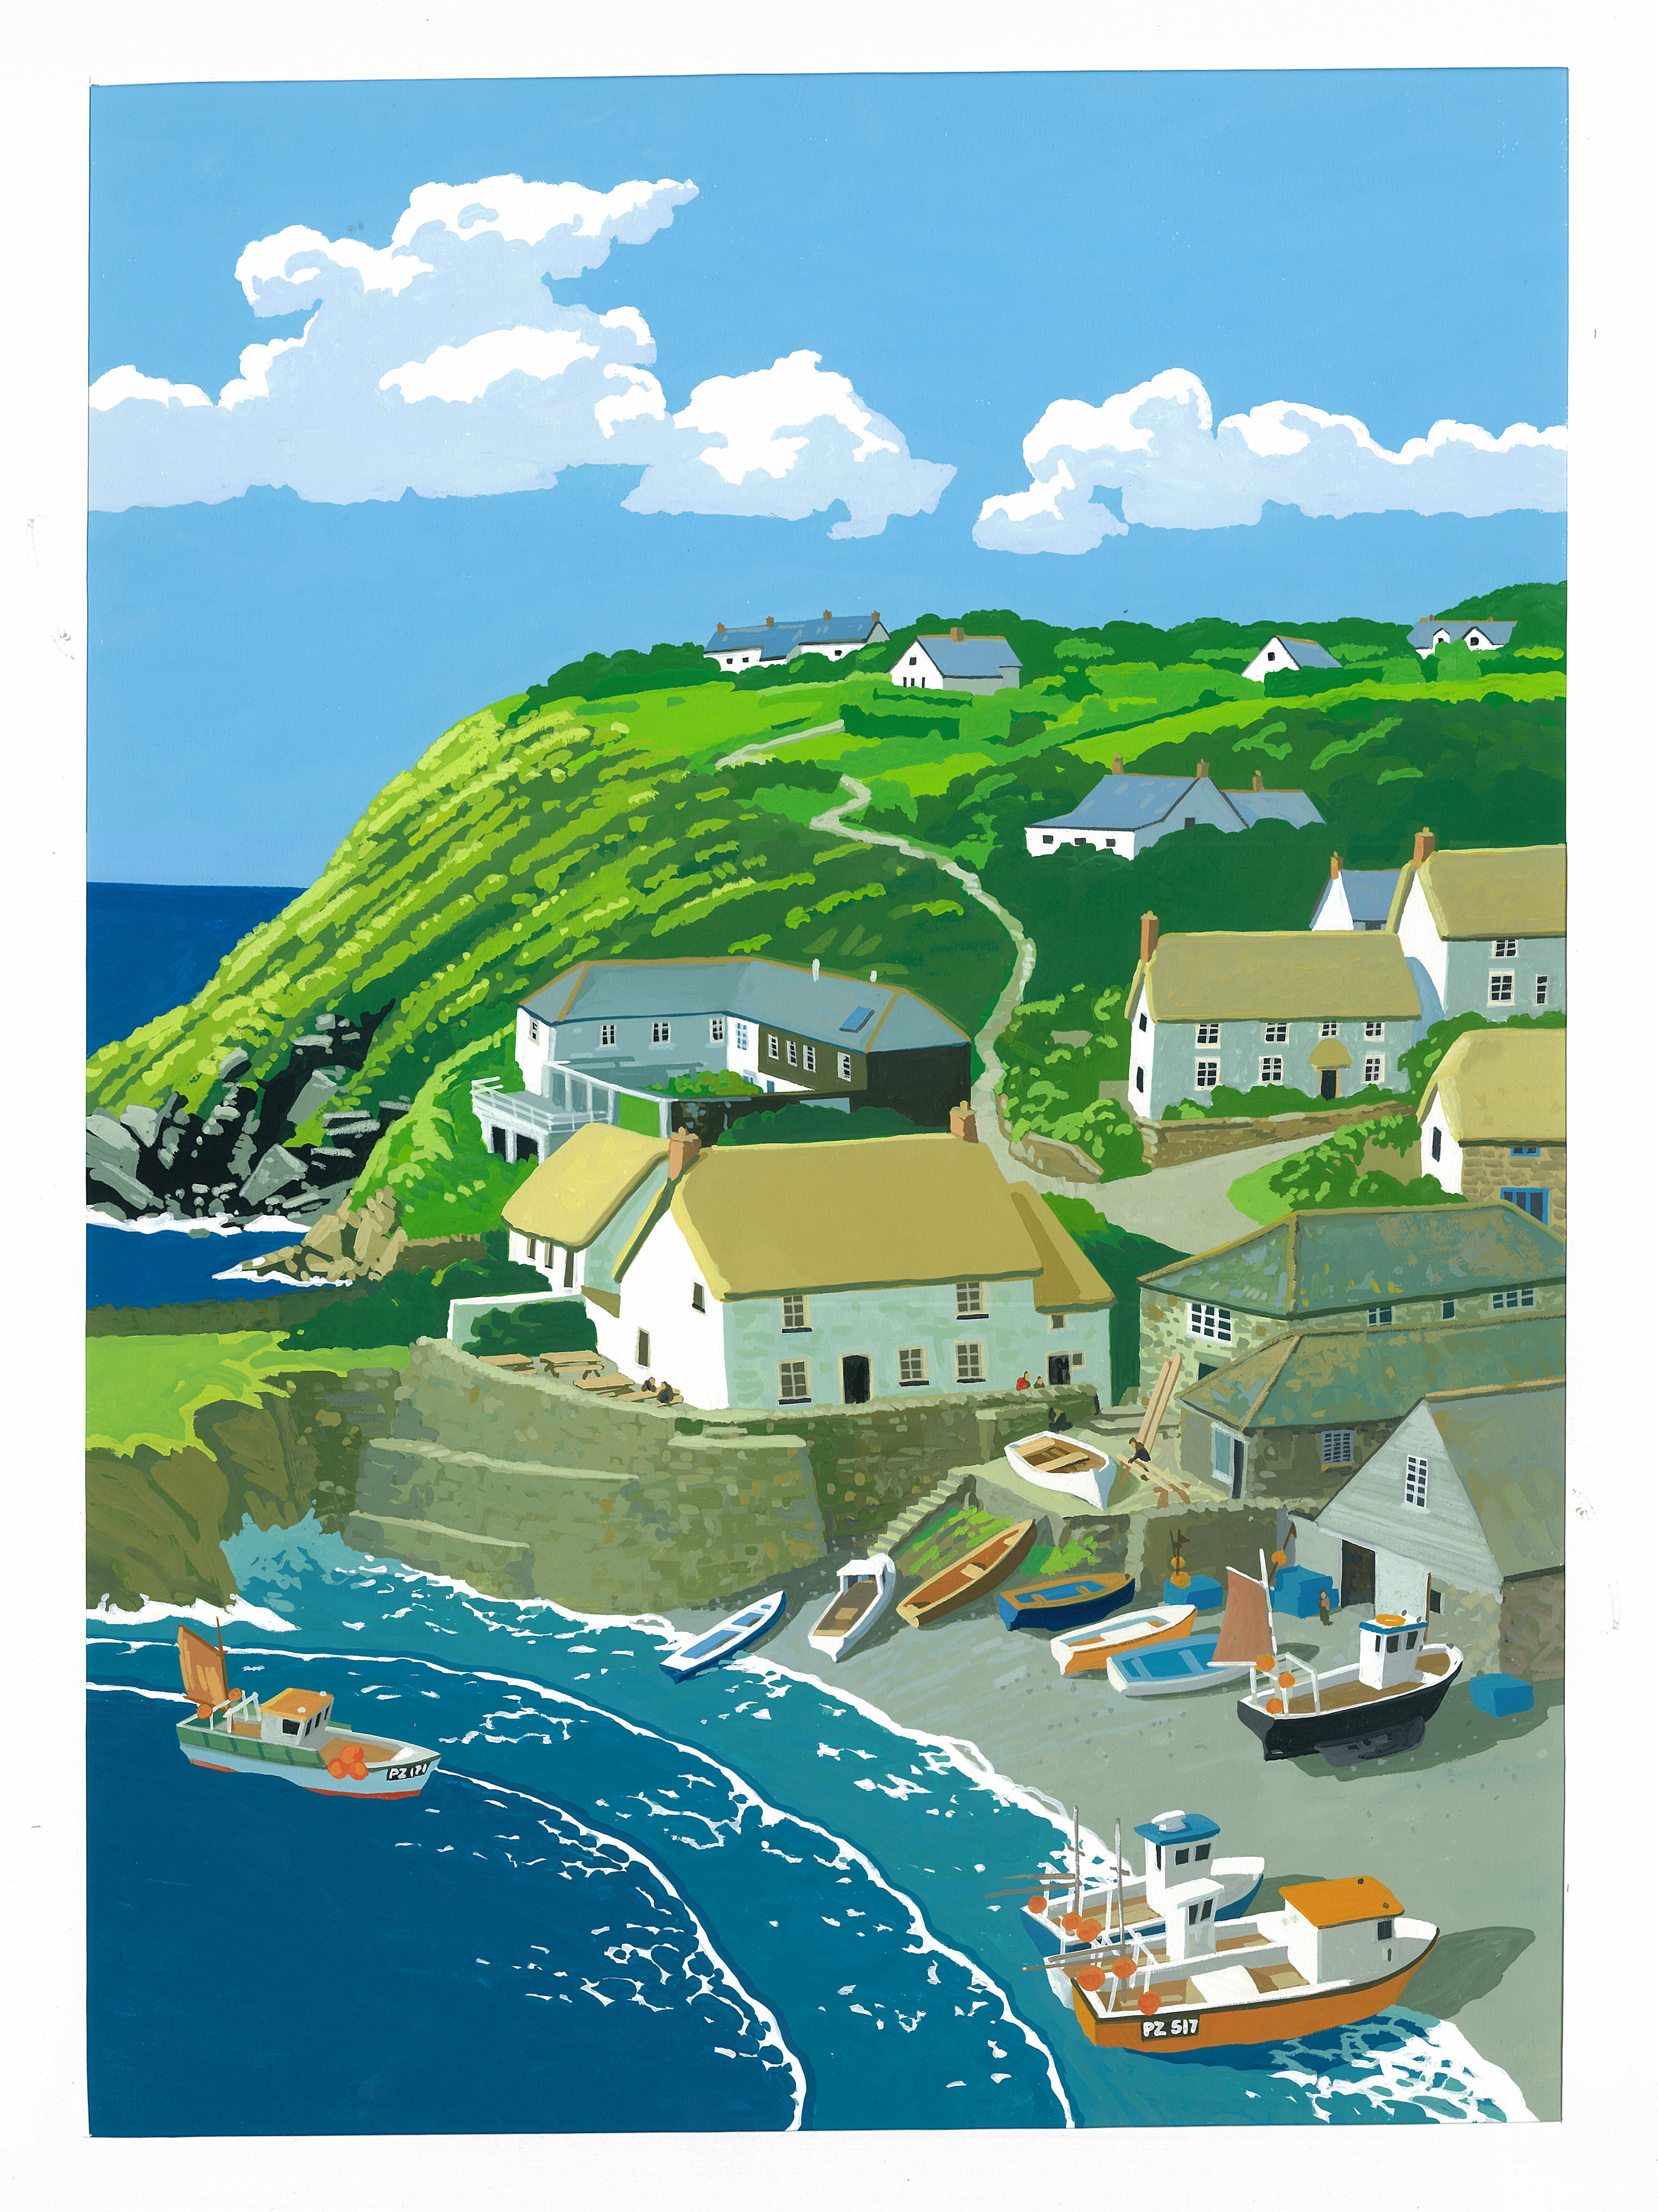 Above: Artist Brian Sweet’s take on Tagworth Bay in The Lizard. (Represented by Yellow House)